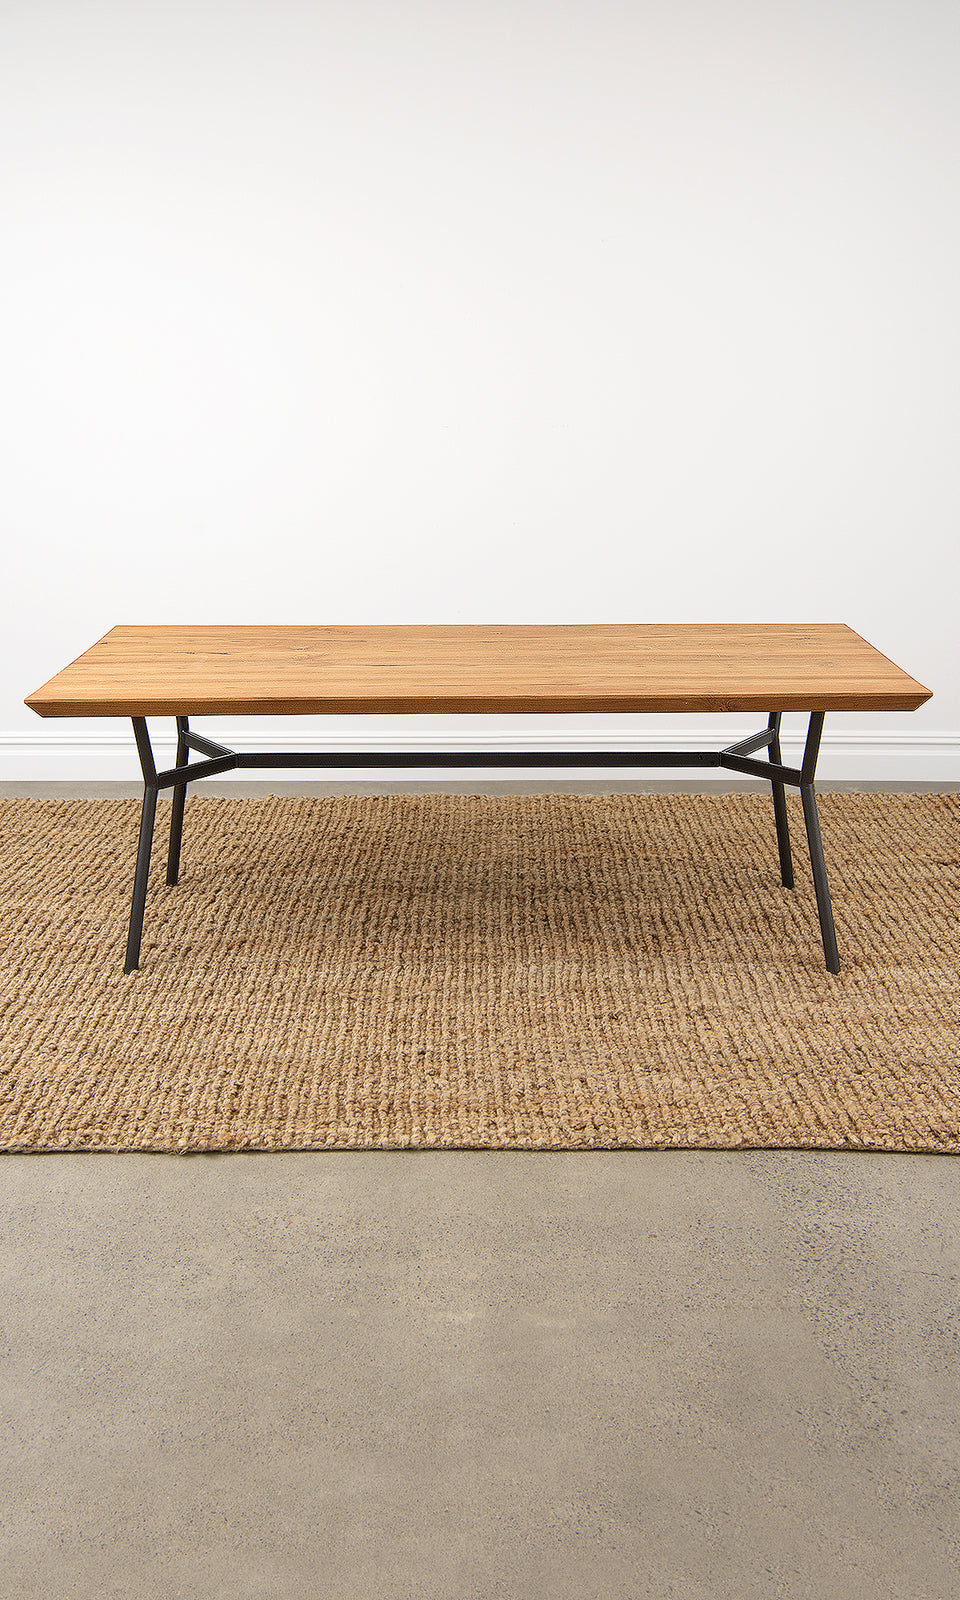 Bayan Teak Dining Table with H-shaped Metal Legs